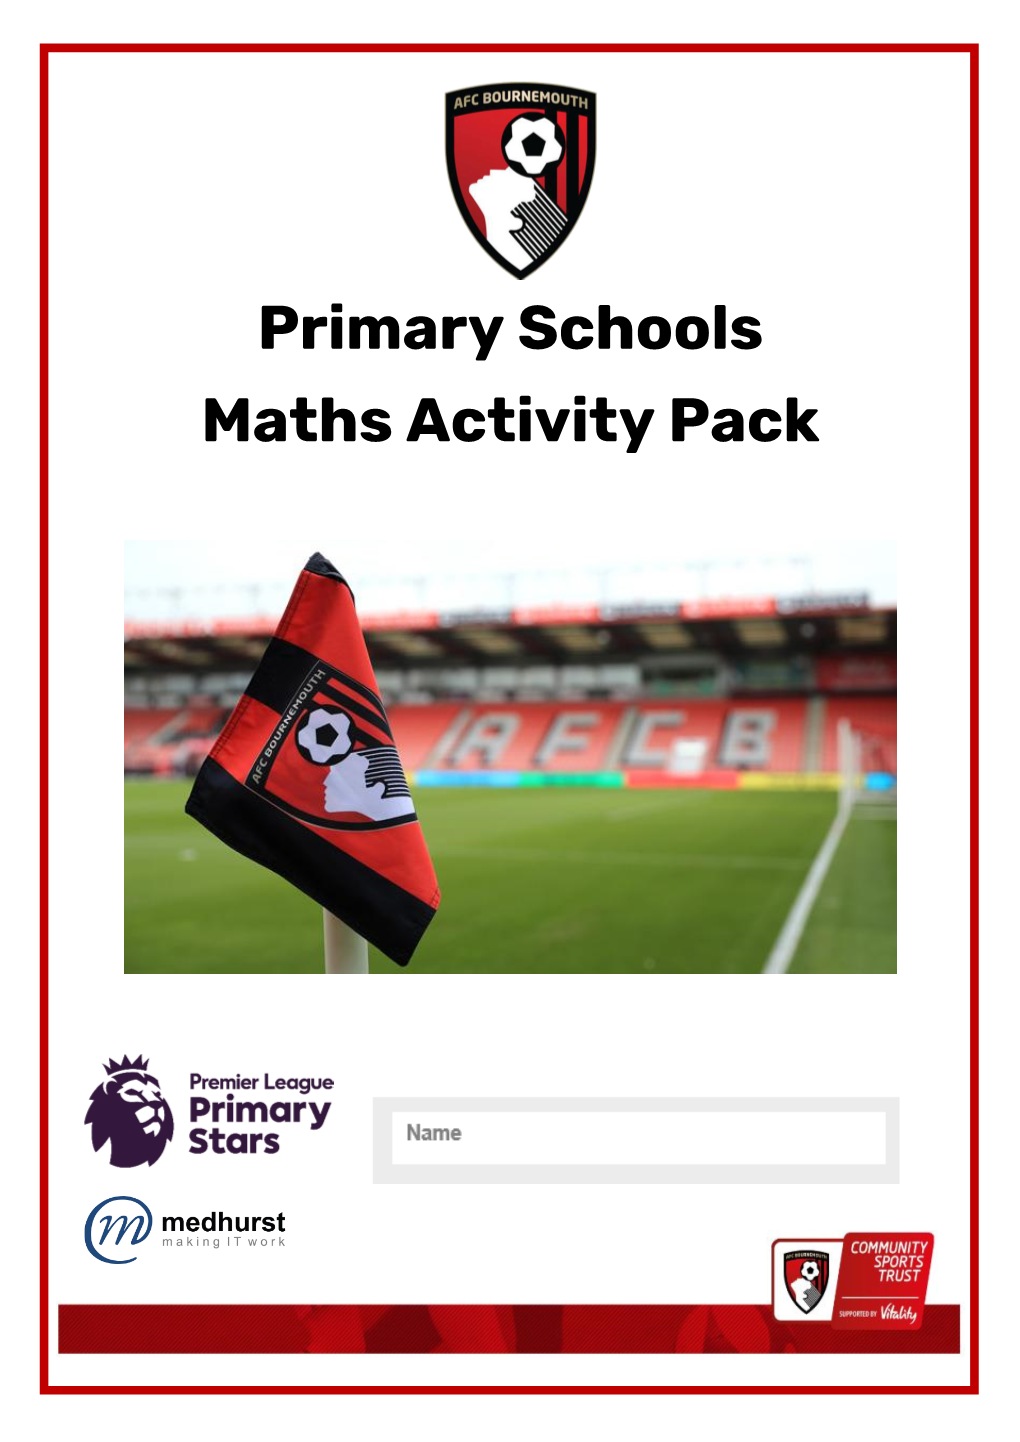 Primary Schools Maths Activity Pack